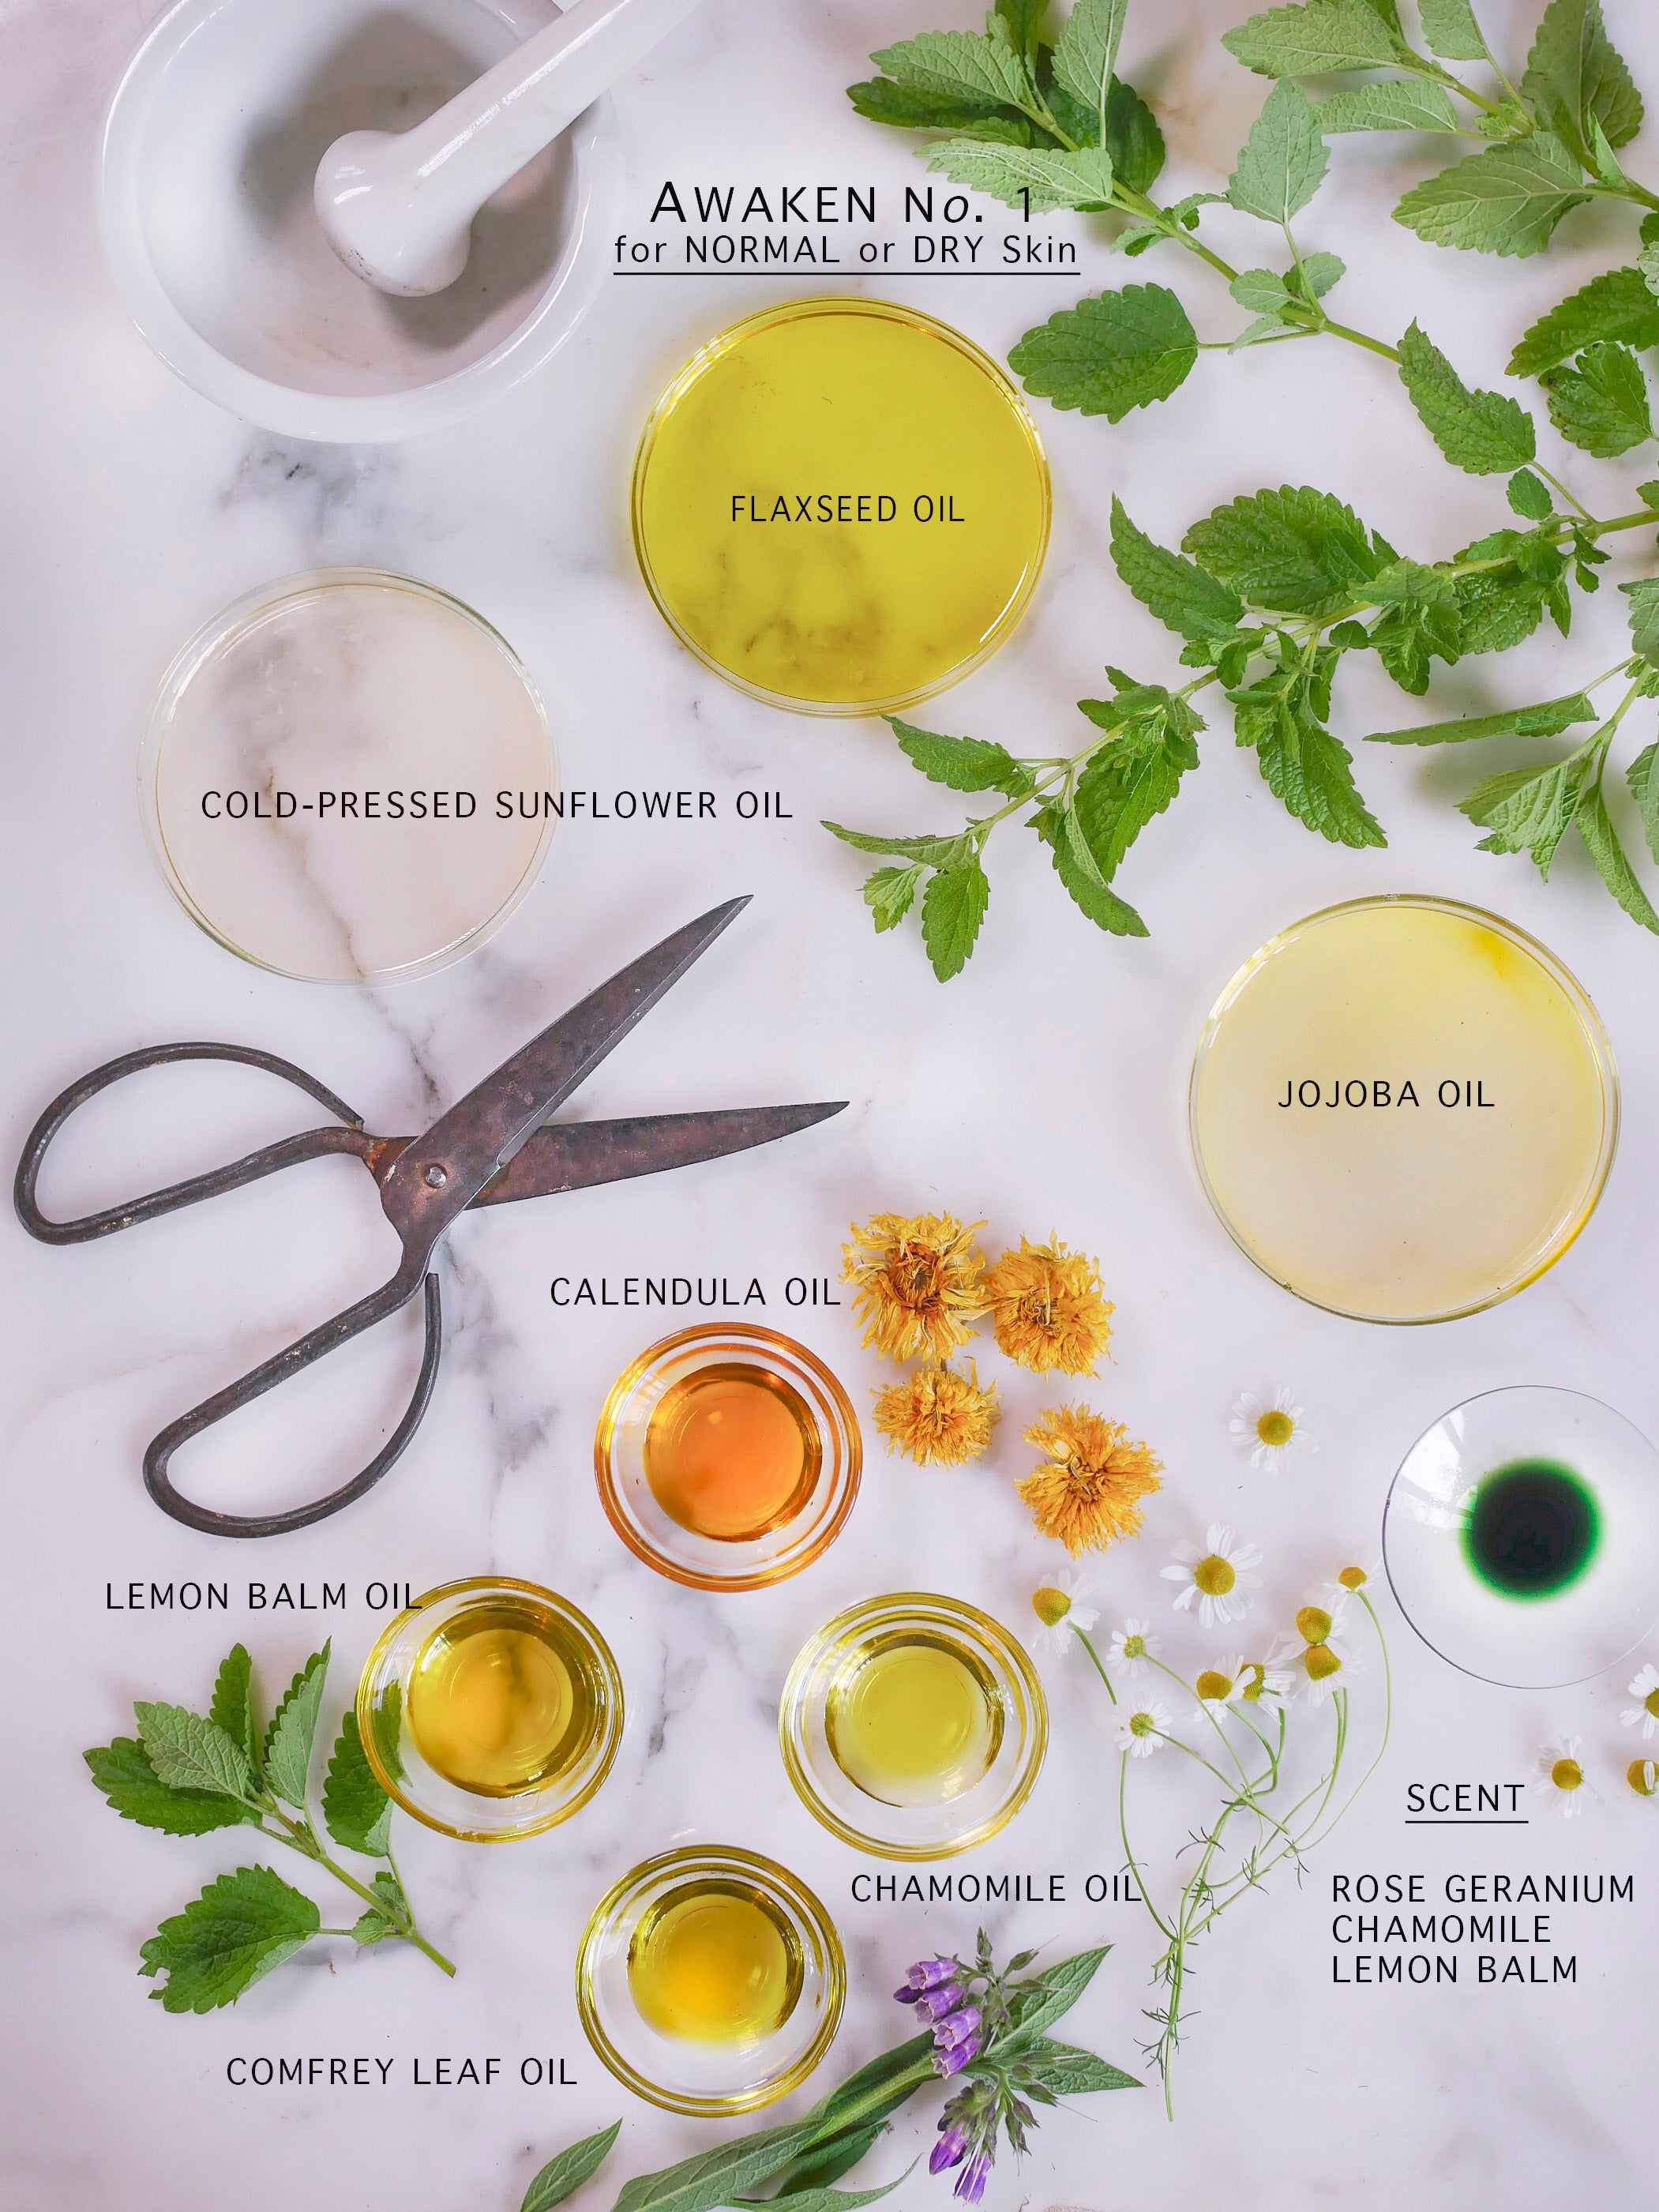 Botanical and organic ingredients that make up the best face serum for dry skin.